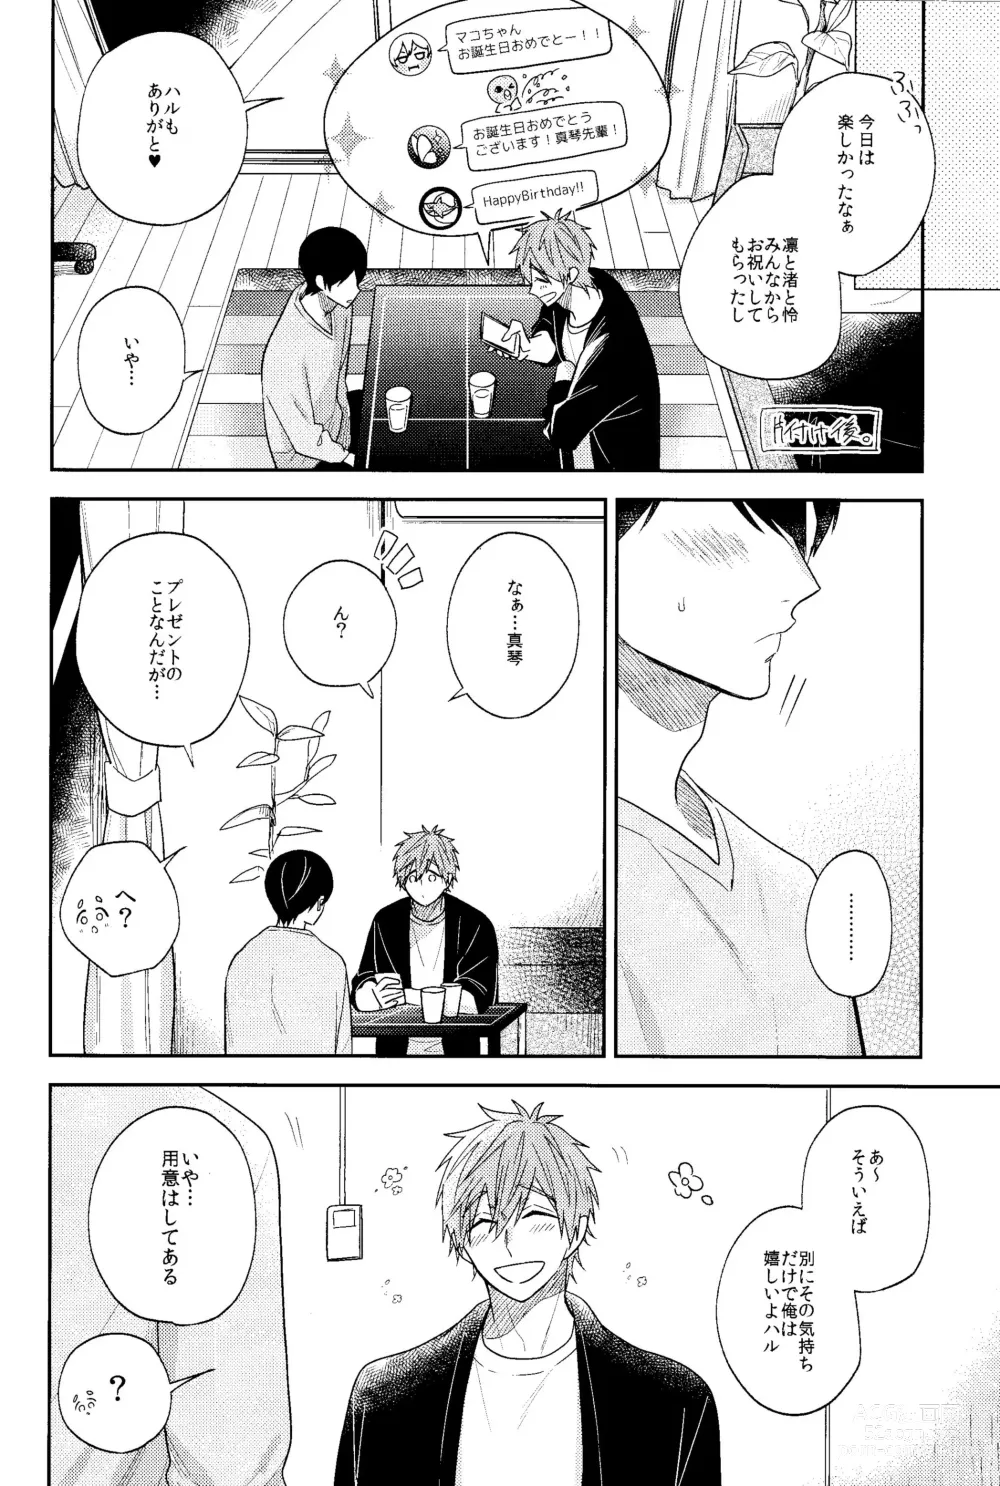 Page 7 of doujinshi Happy Birthday present is me